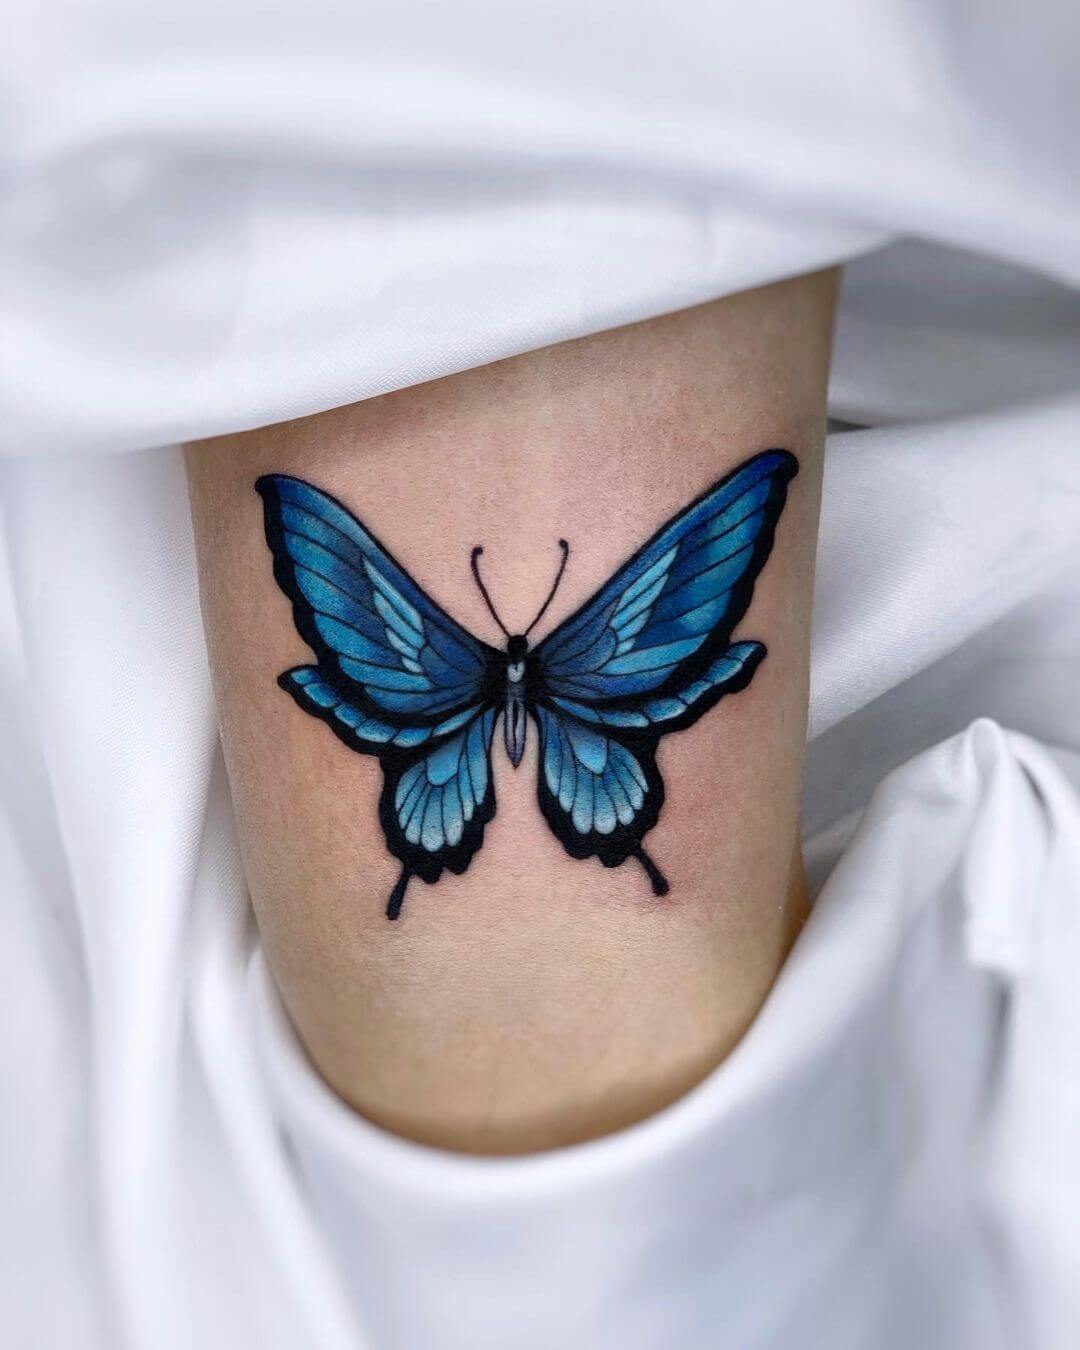 Butterfly Tattoo Designs And The Meaning Behind Them, 53% OFF